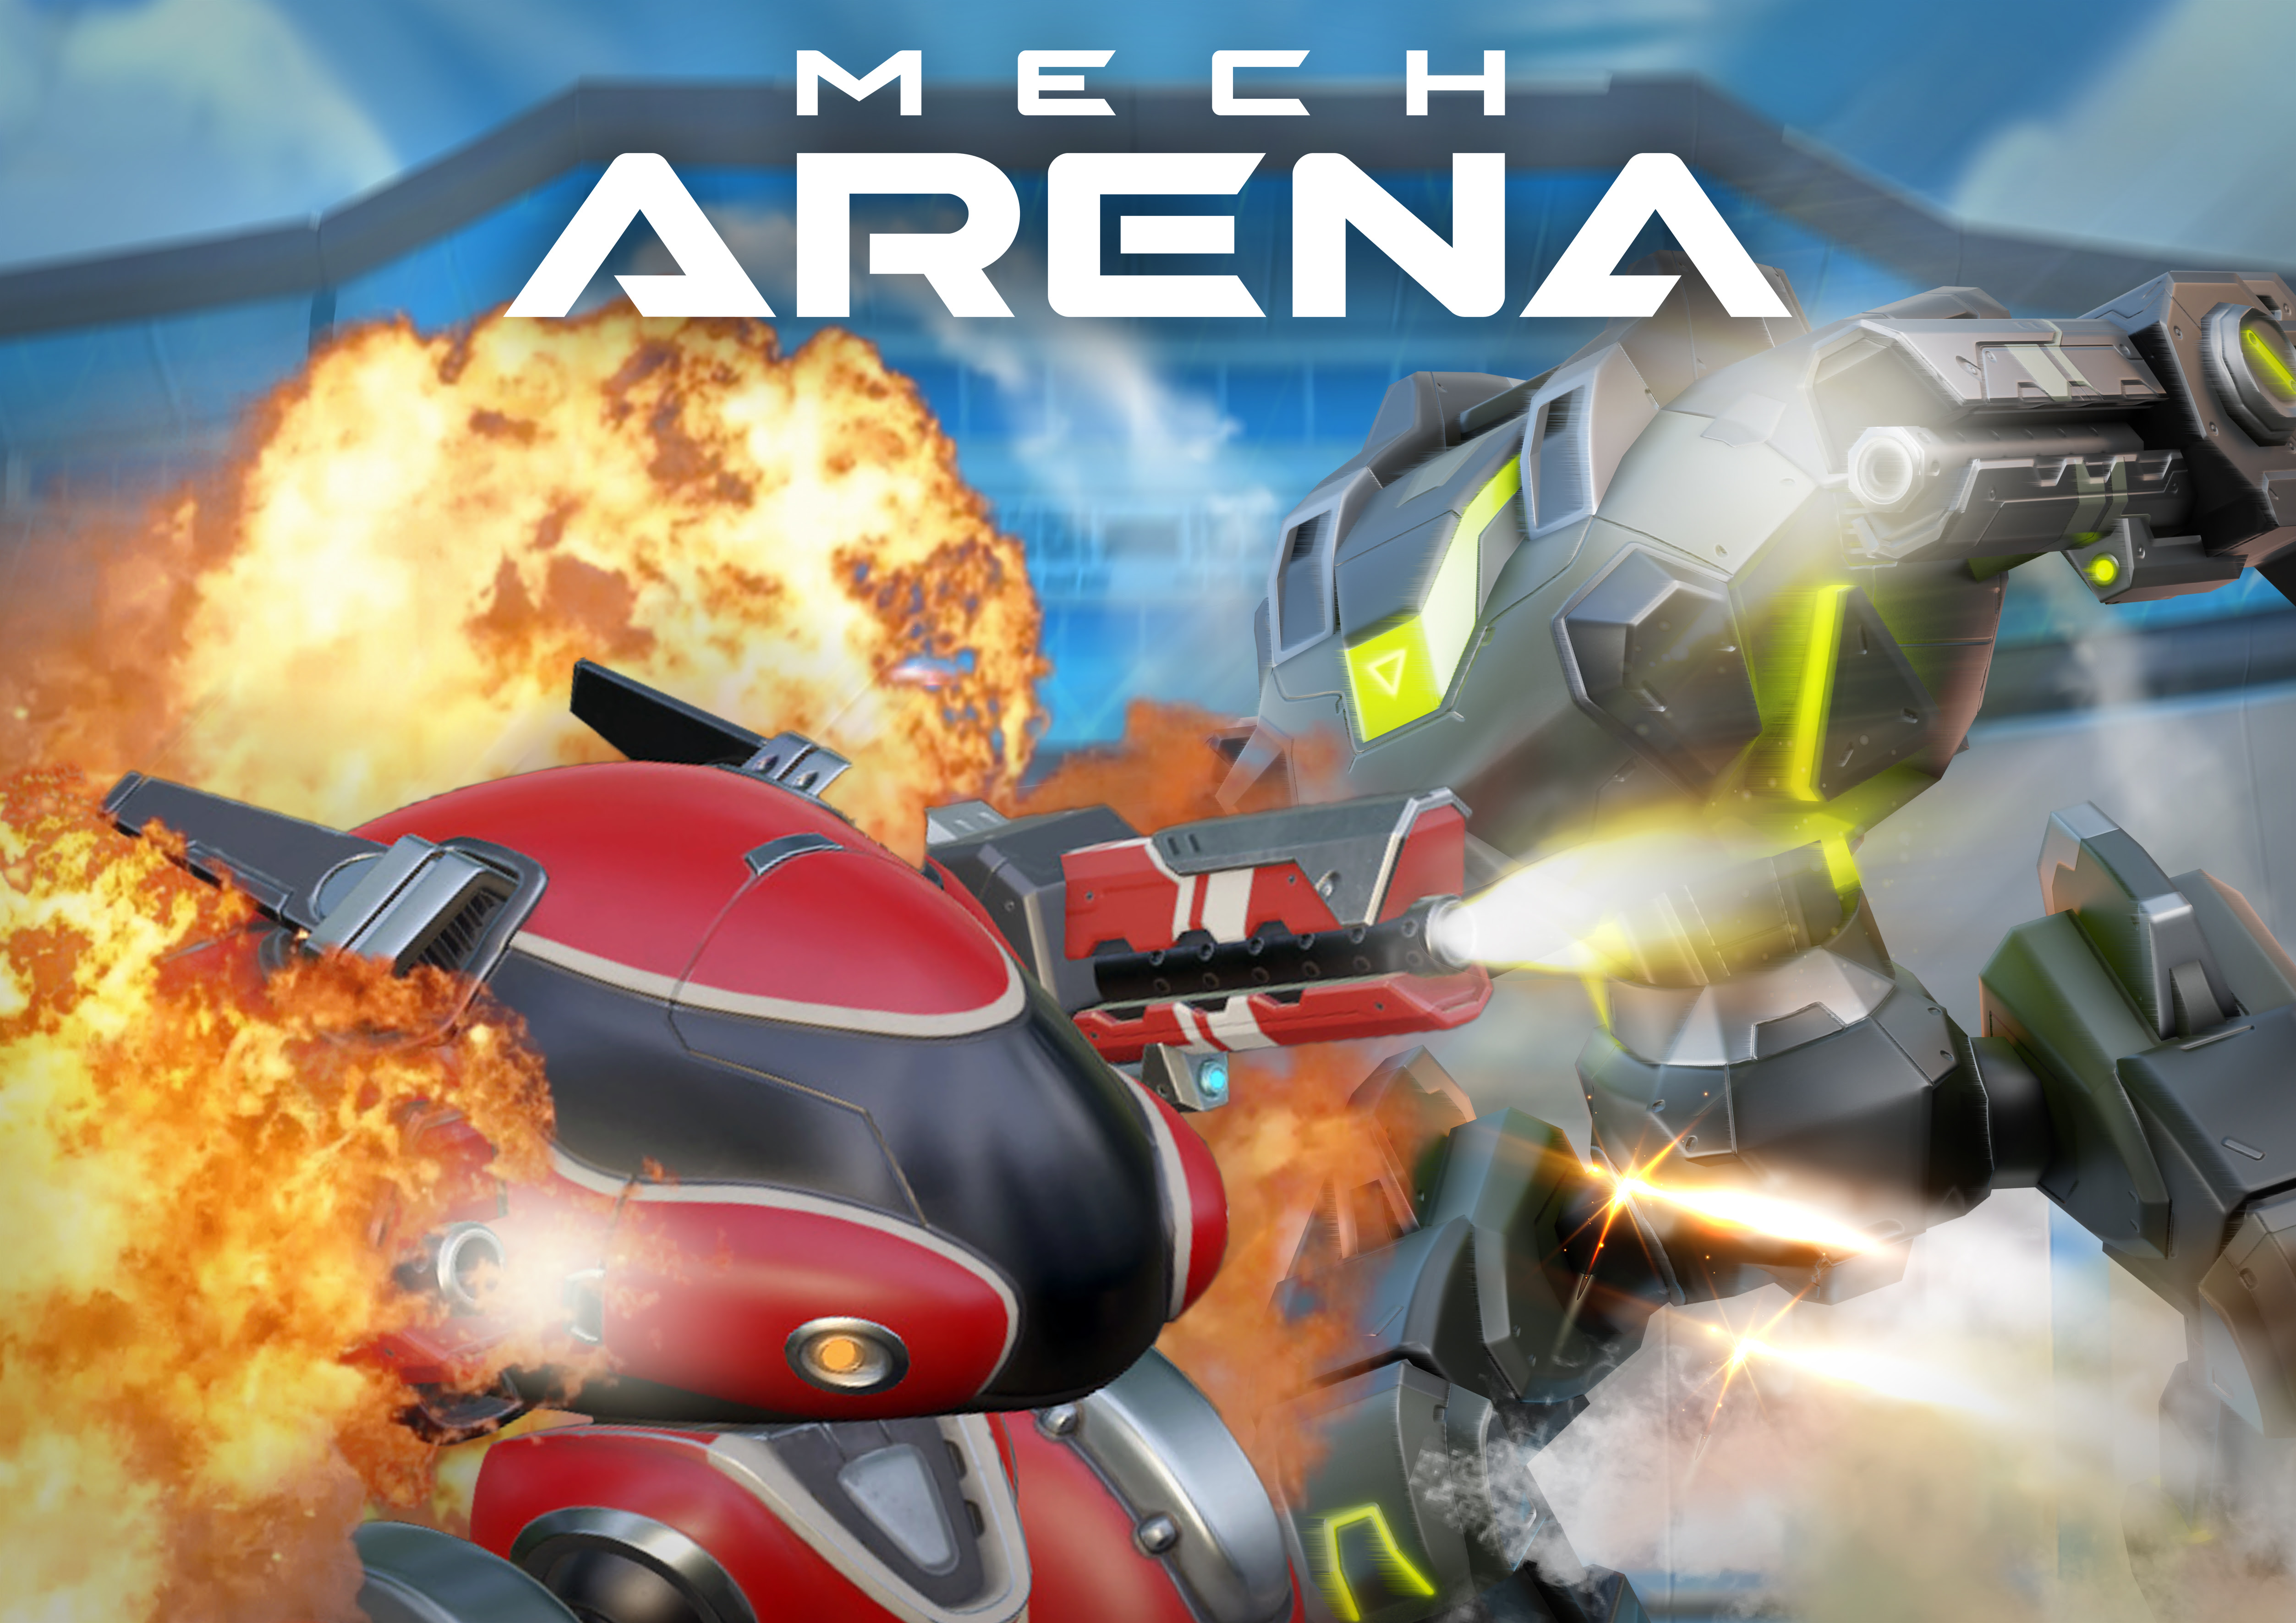 MECH ARENA MechsAreHere Event Begins Today on iOS and Android Mobile